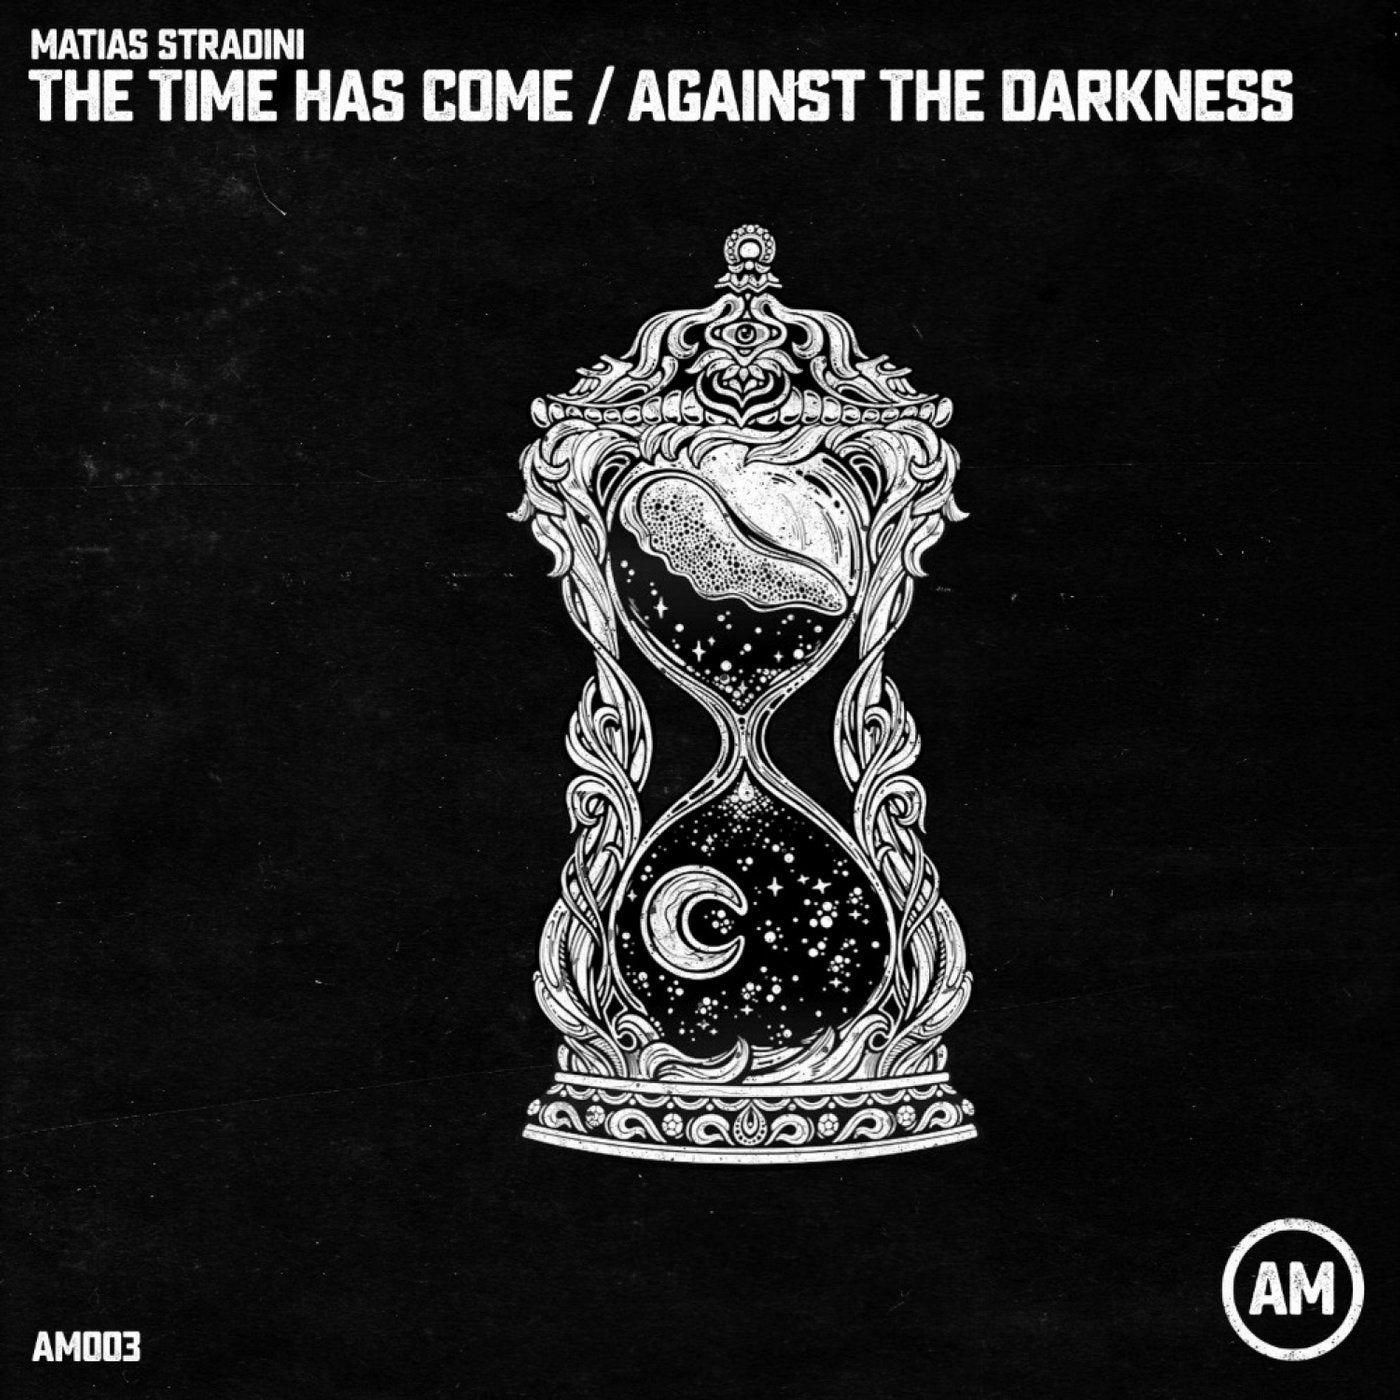 The Time Has Come / Against the Darkness